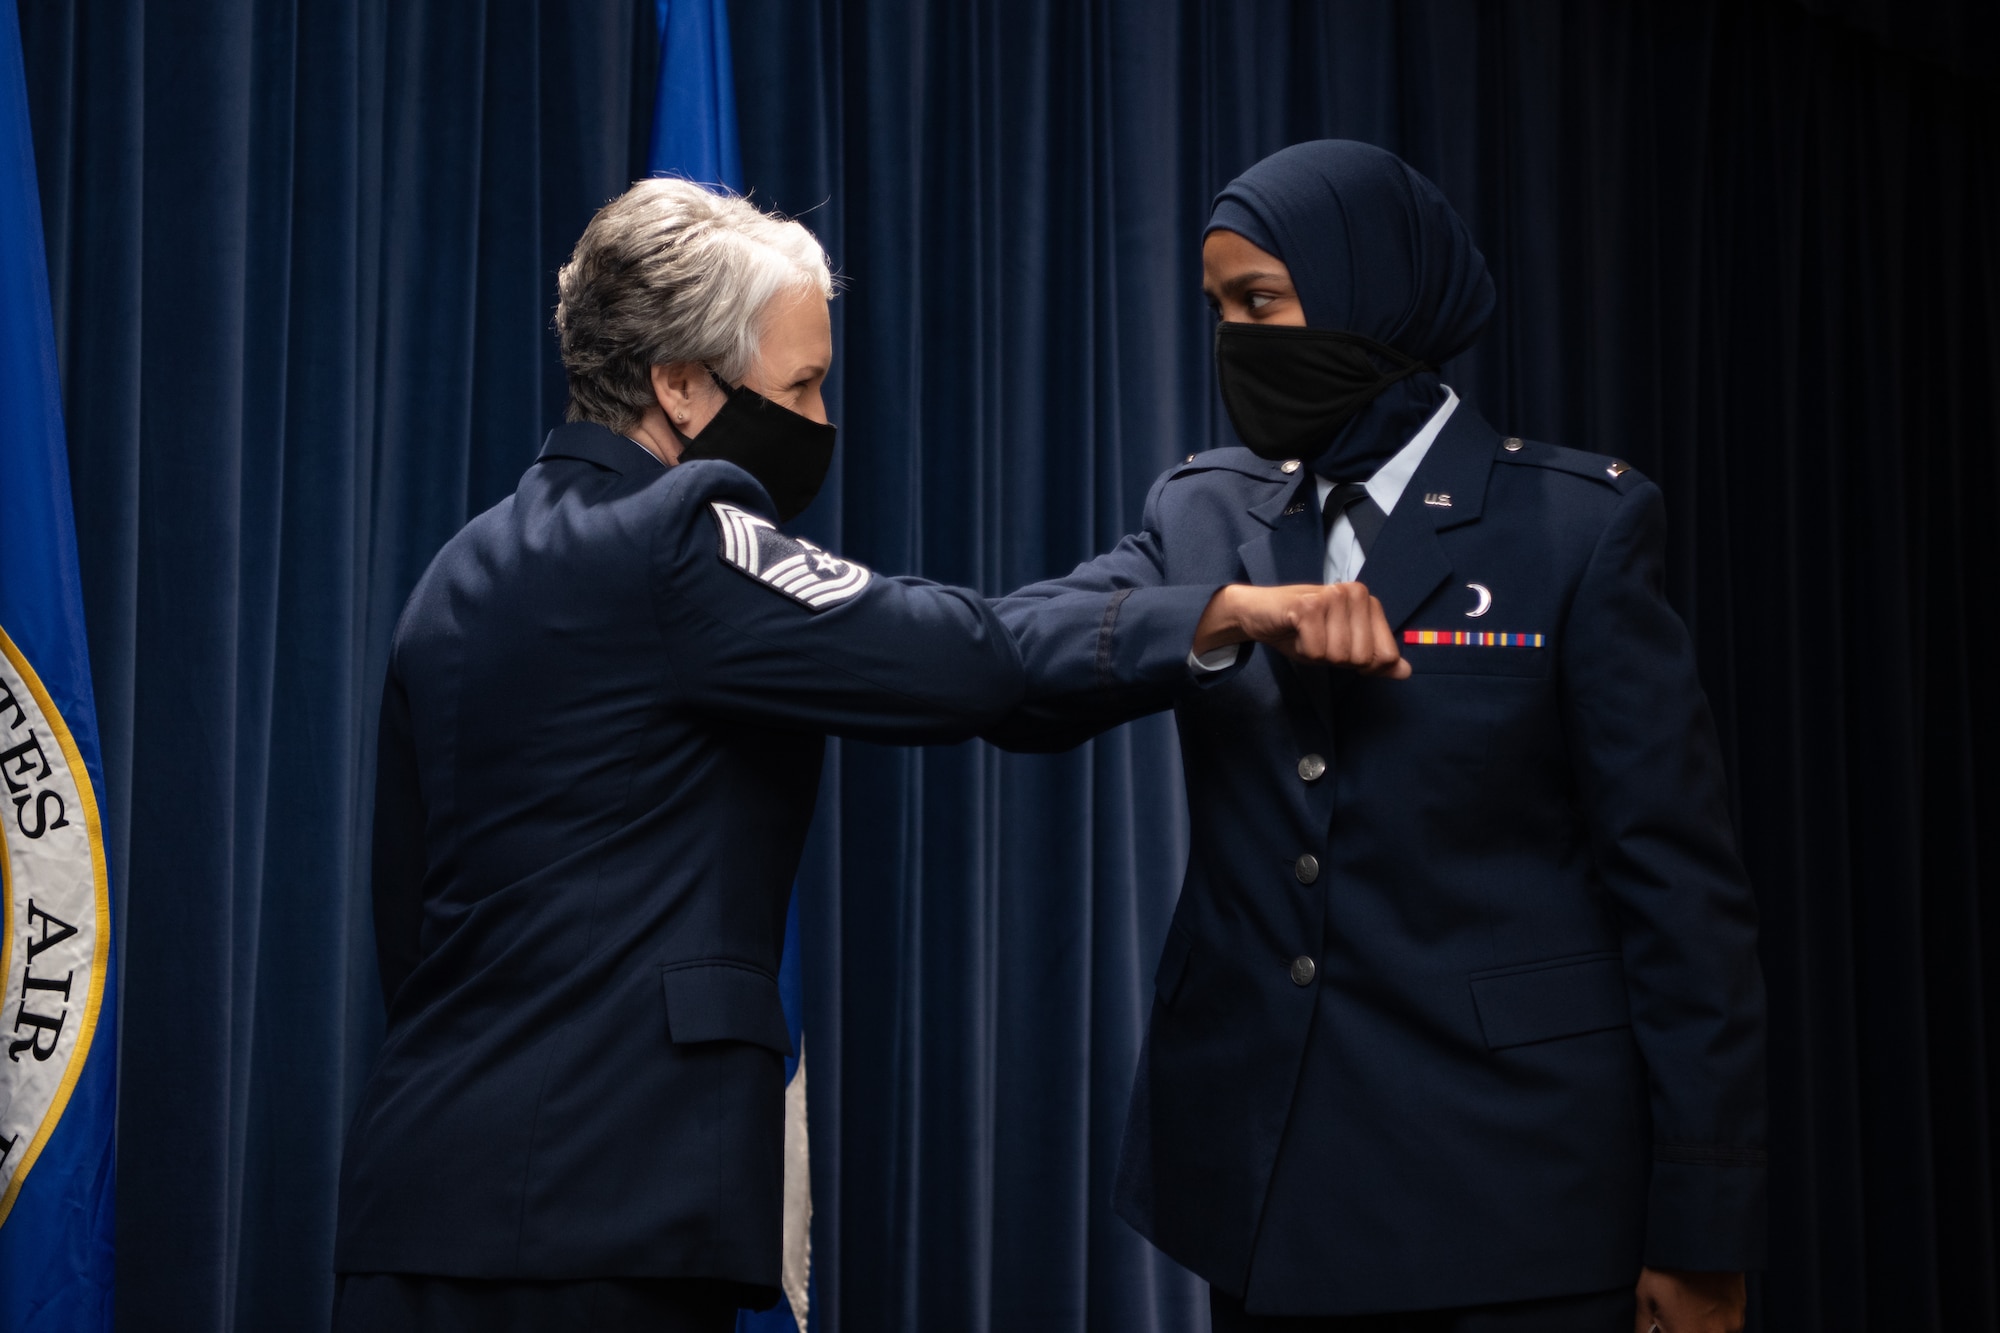 Chief Master Sgt. Natalie Gray, Air Force Chaplain Corps senior enlisted advisor and religious affairs career field manager, congratulates Chaplain 1st Lt. Saleha Jabeen, a graduate of Basic Chaplain Course Class 21A, with an elbow bump Feb. 5, 2021, at the Ira C. Eaker Center for Leadership Development on Maxwell Air Force Base, Ala. Gray attended the graduation with Maj. Gen. Steven Schaik, Air Force chief of chaplains, to celebrate the graduates’ accomplishment in a modified ceremony to adhere to guidance from the Centers for Disease Control and Prevention and the Department of Defense.